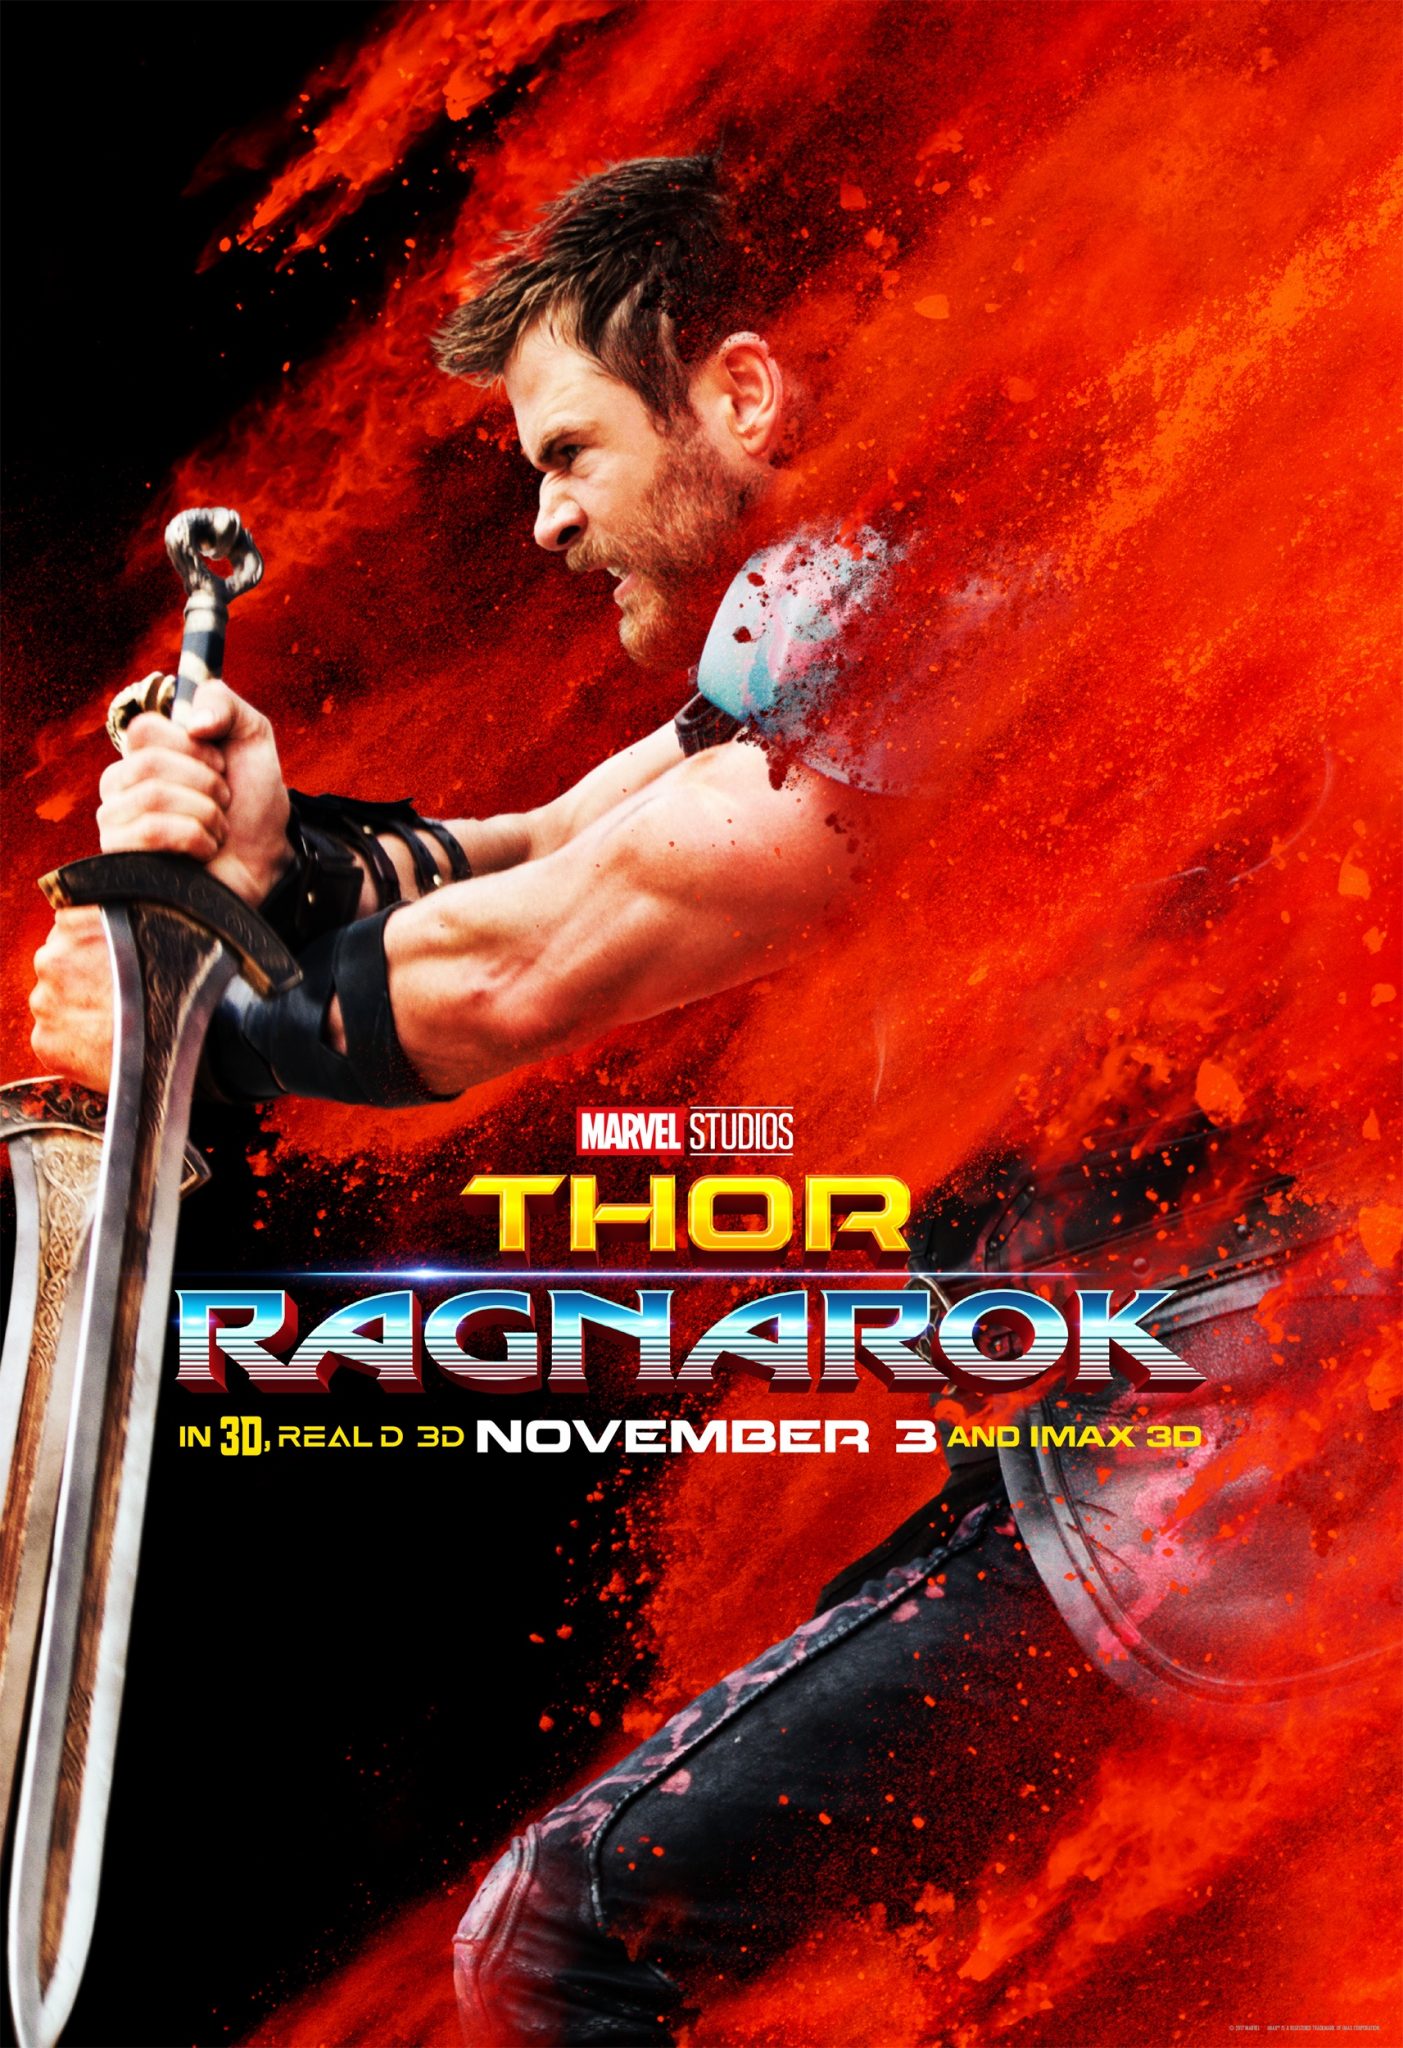 Marvel Studios Celebrates THORsday With New Posters and Tickets for Thor: Ragnarok!